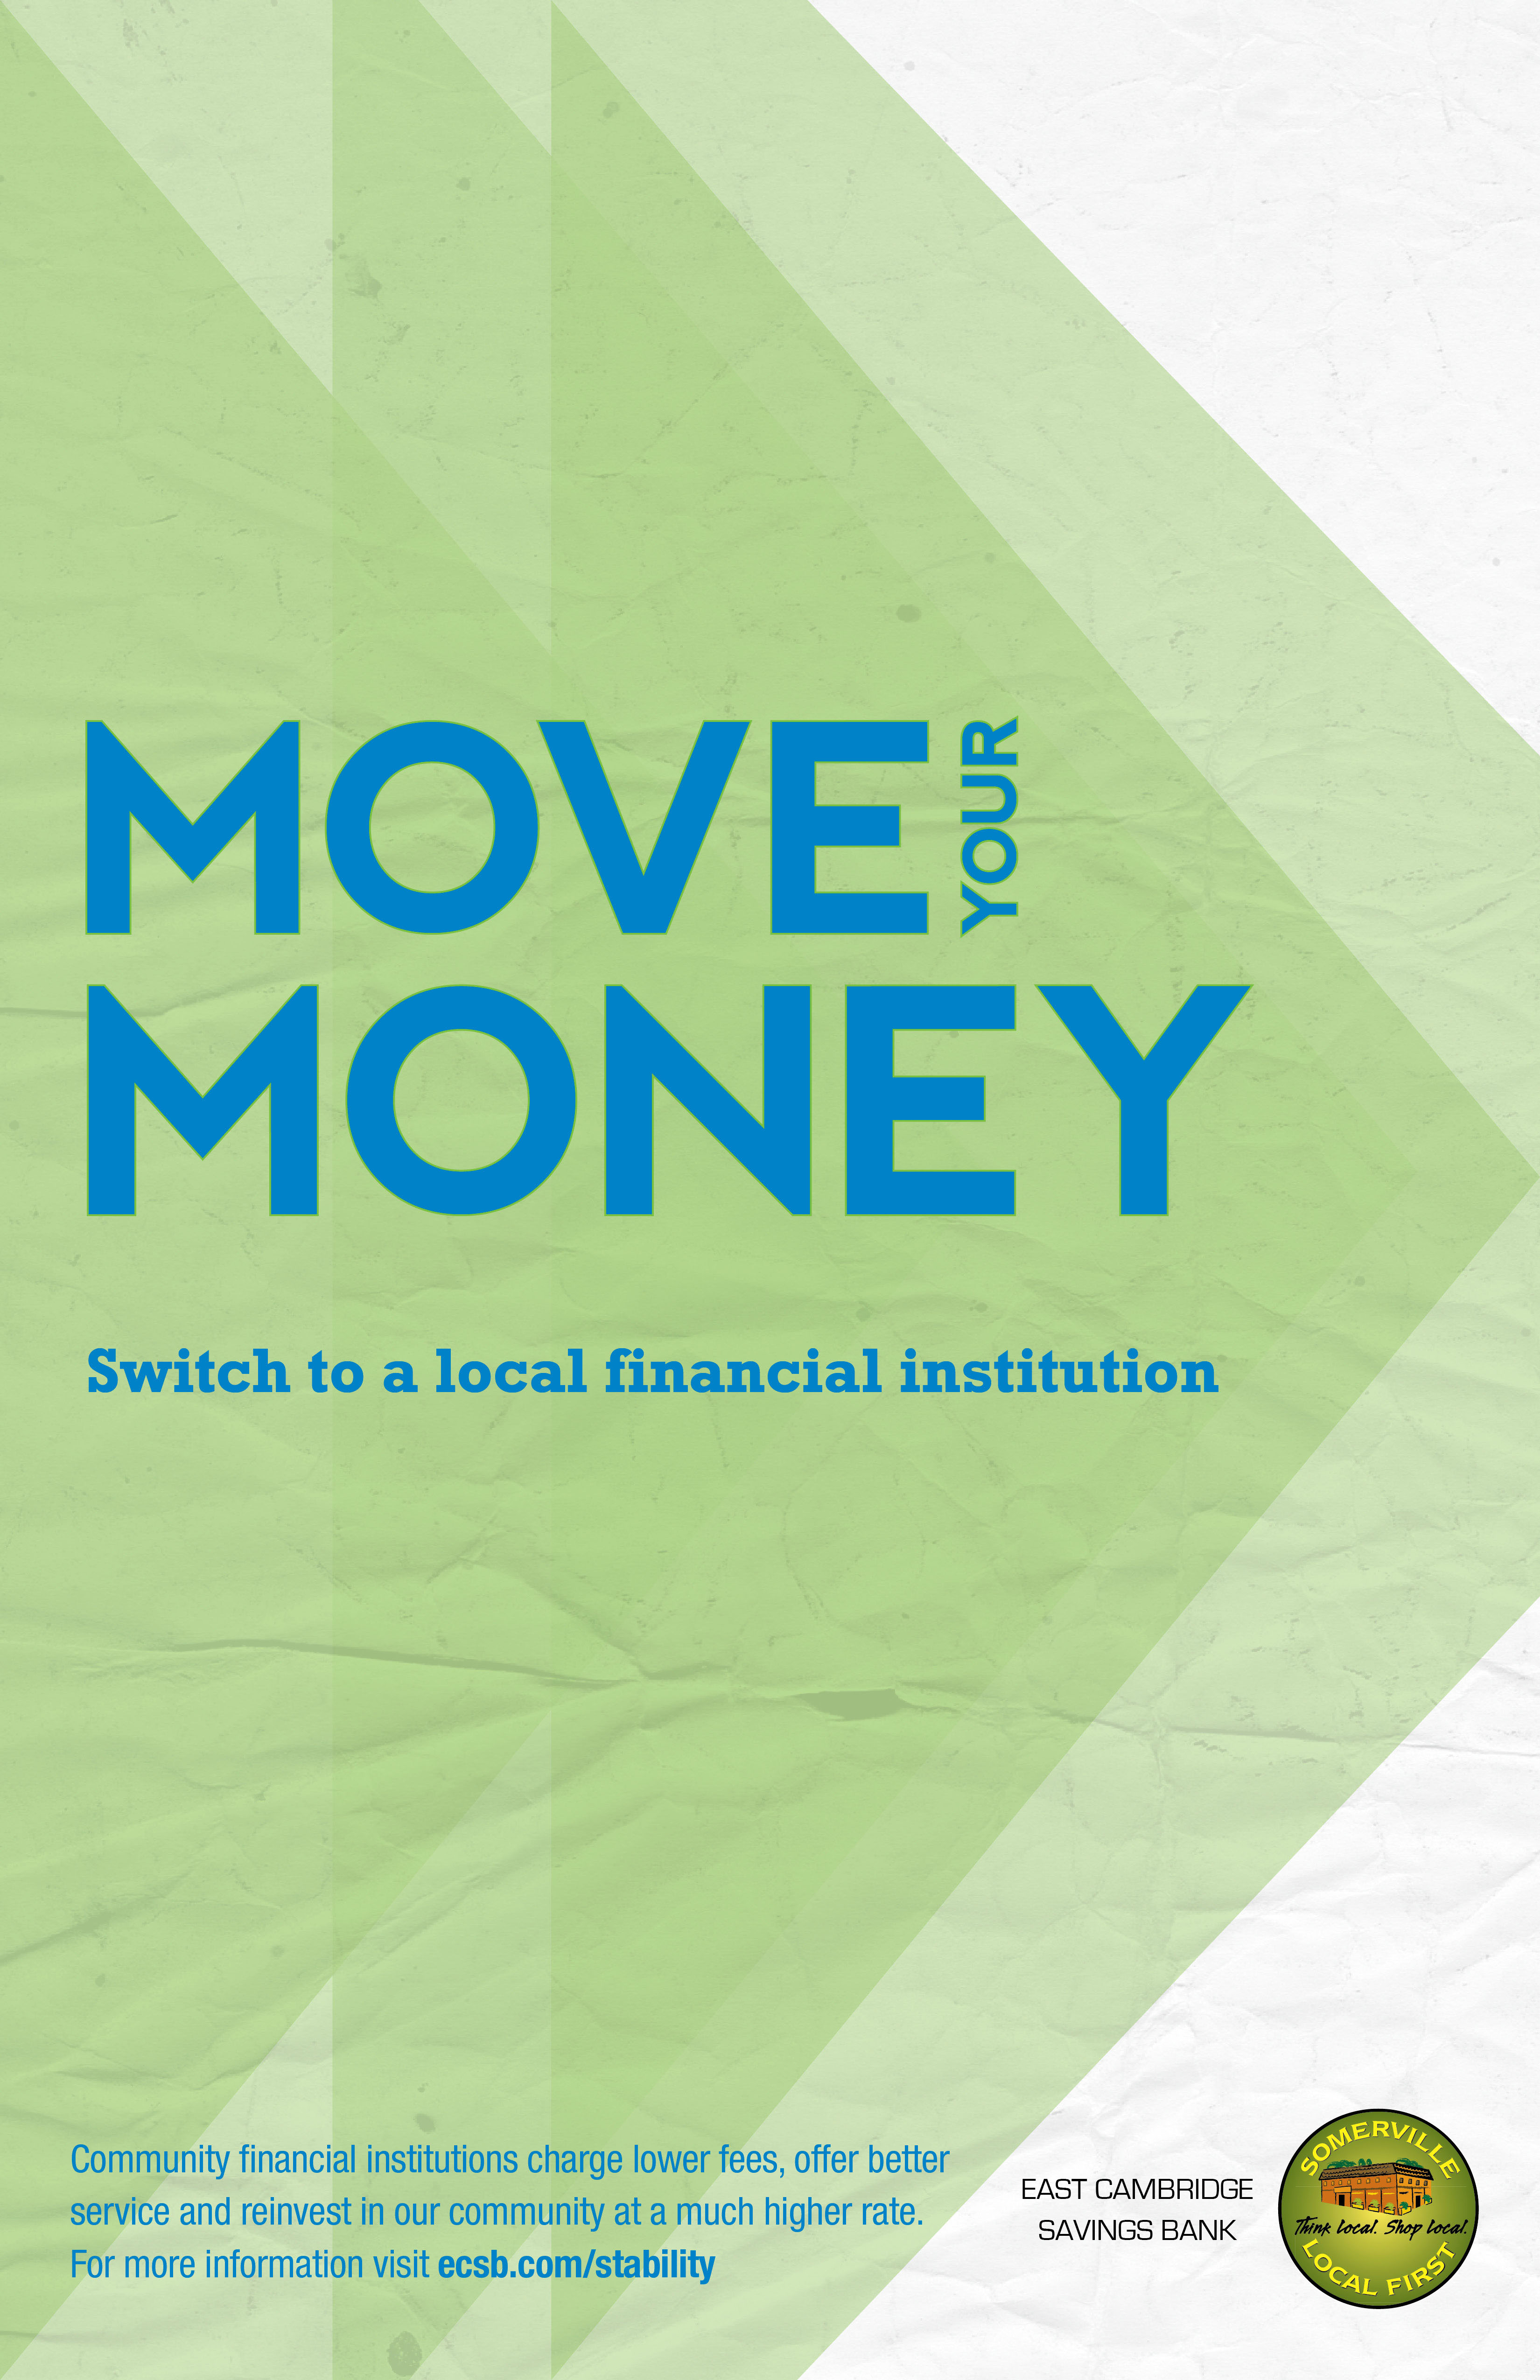 Move your Money - Switch to a local financial institution